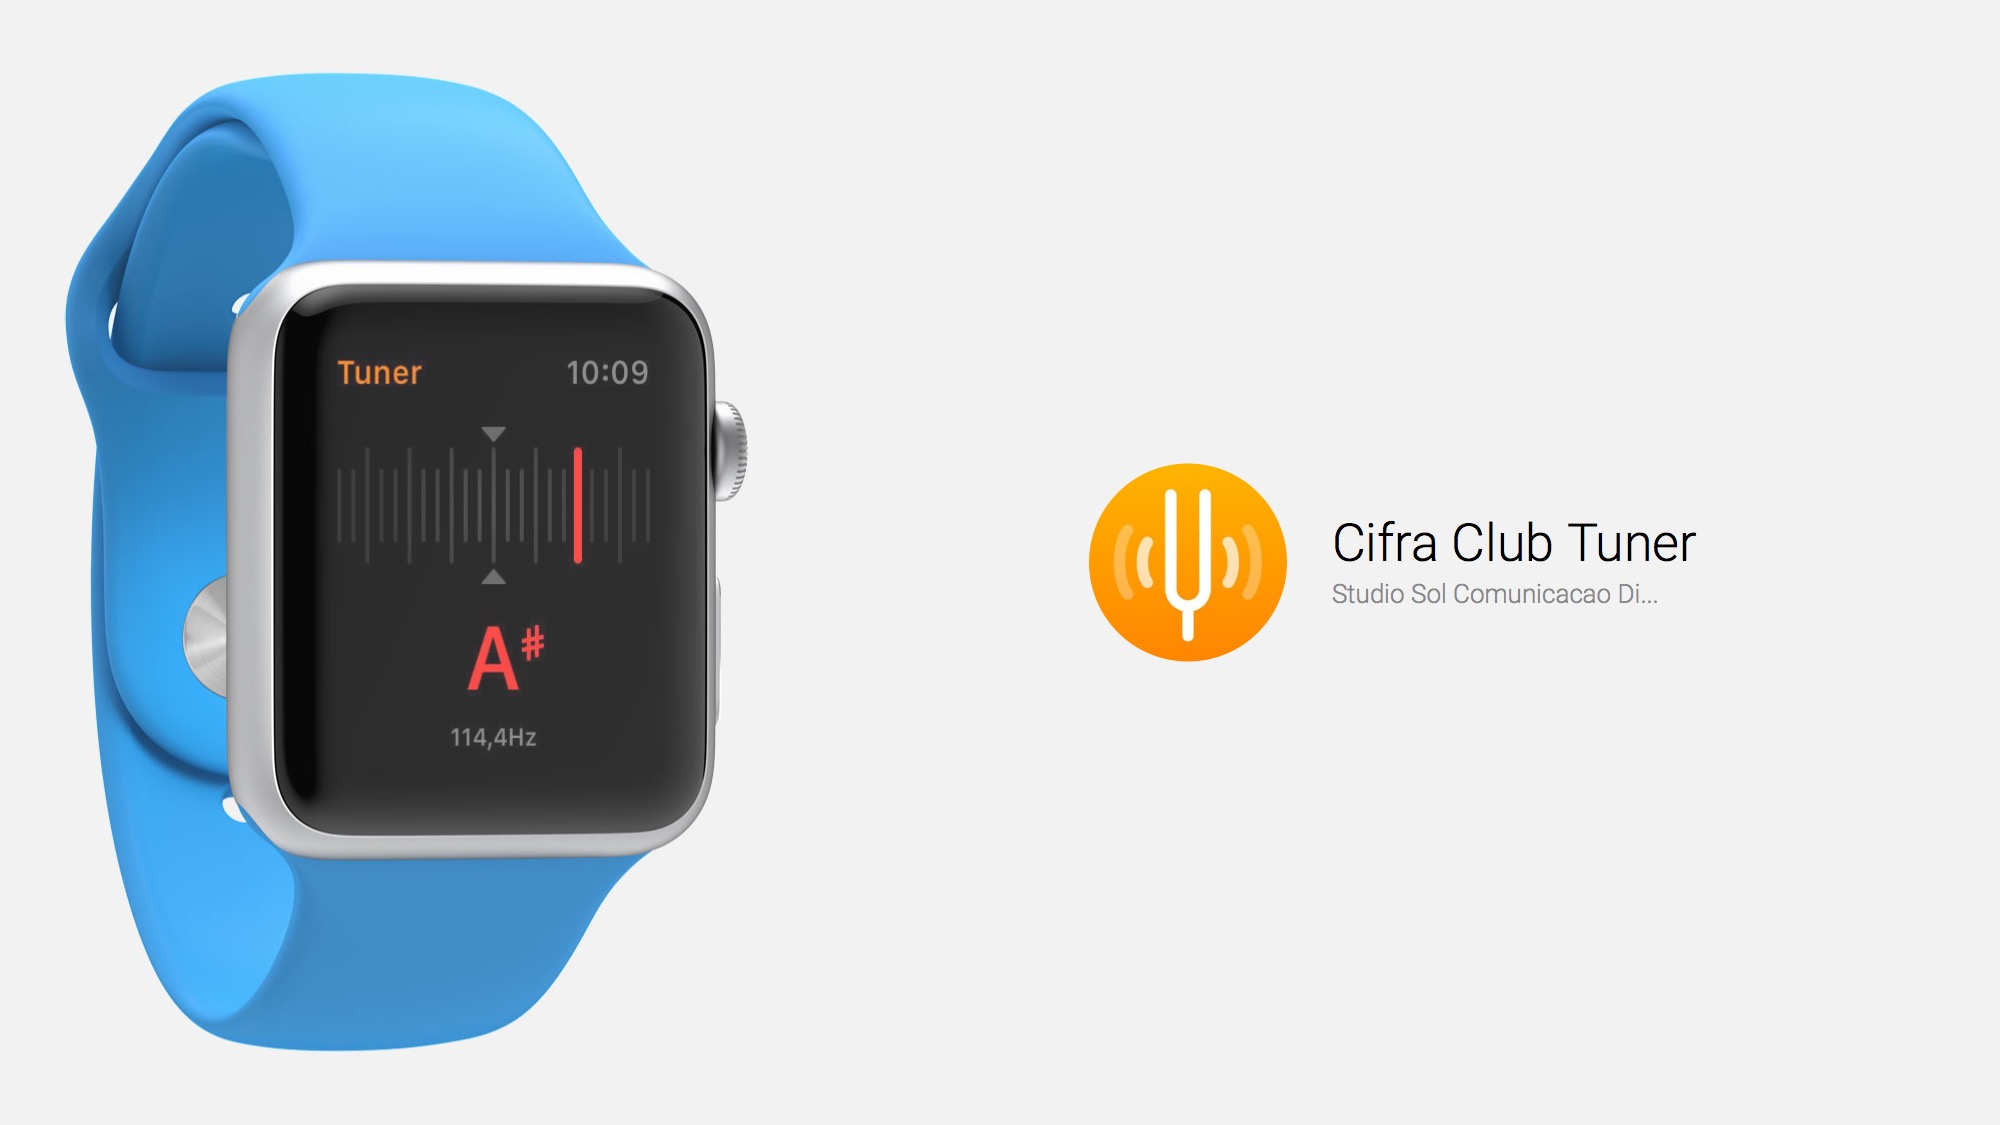 Tune Stringed Instruments With Apple Watch, Thanks to Cifra Club Tuner